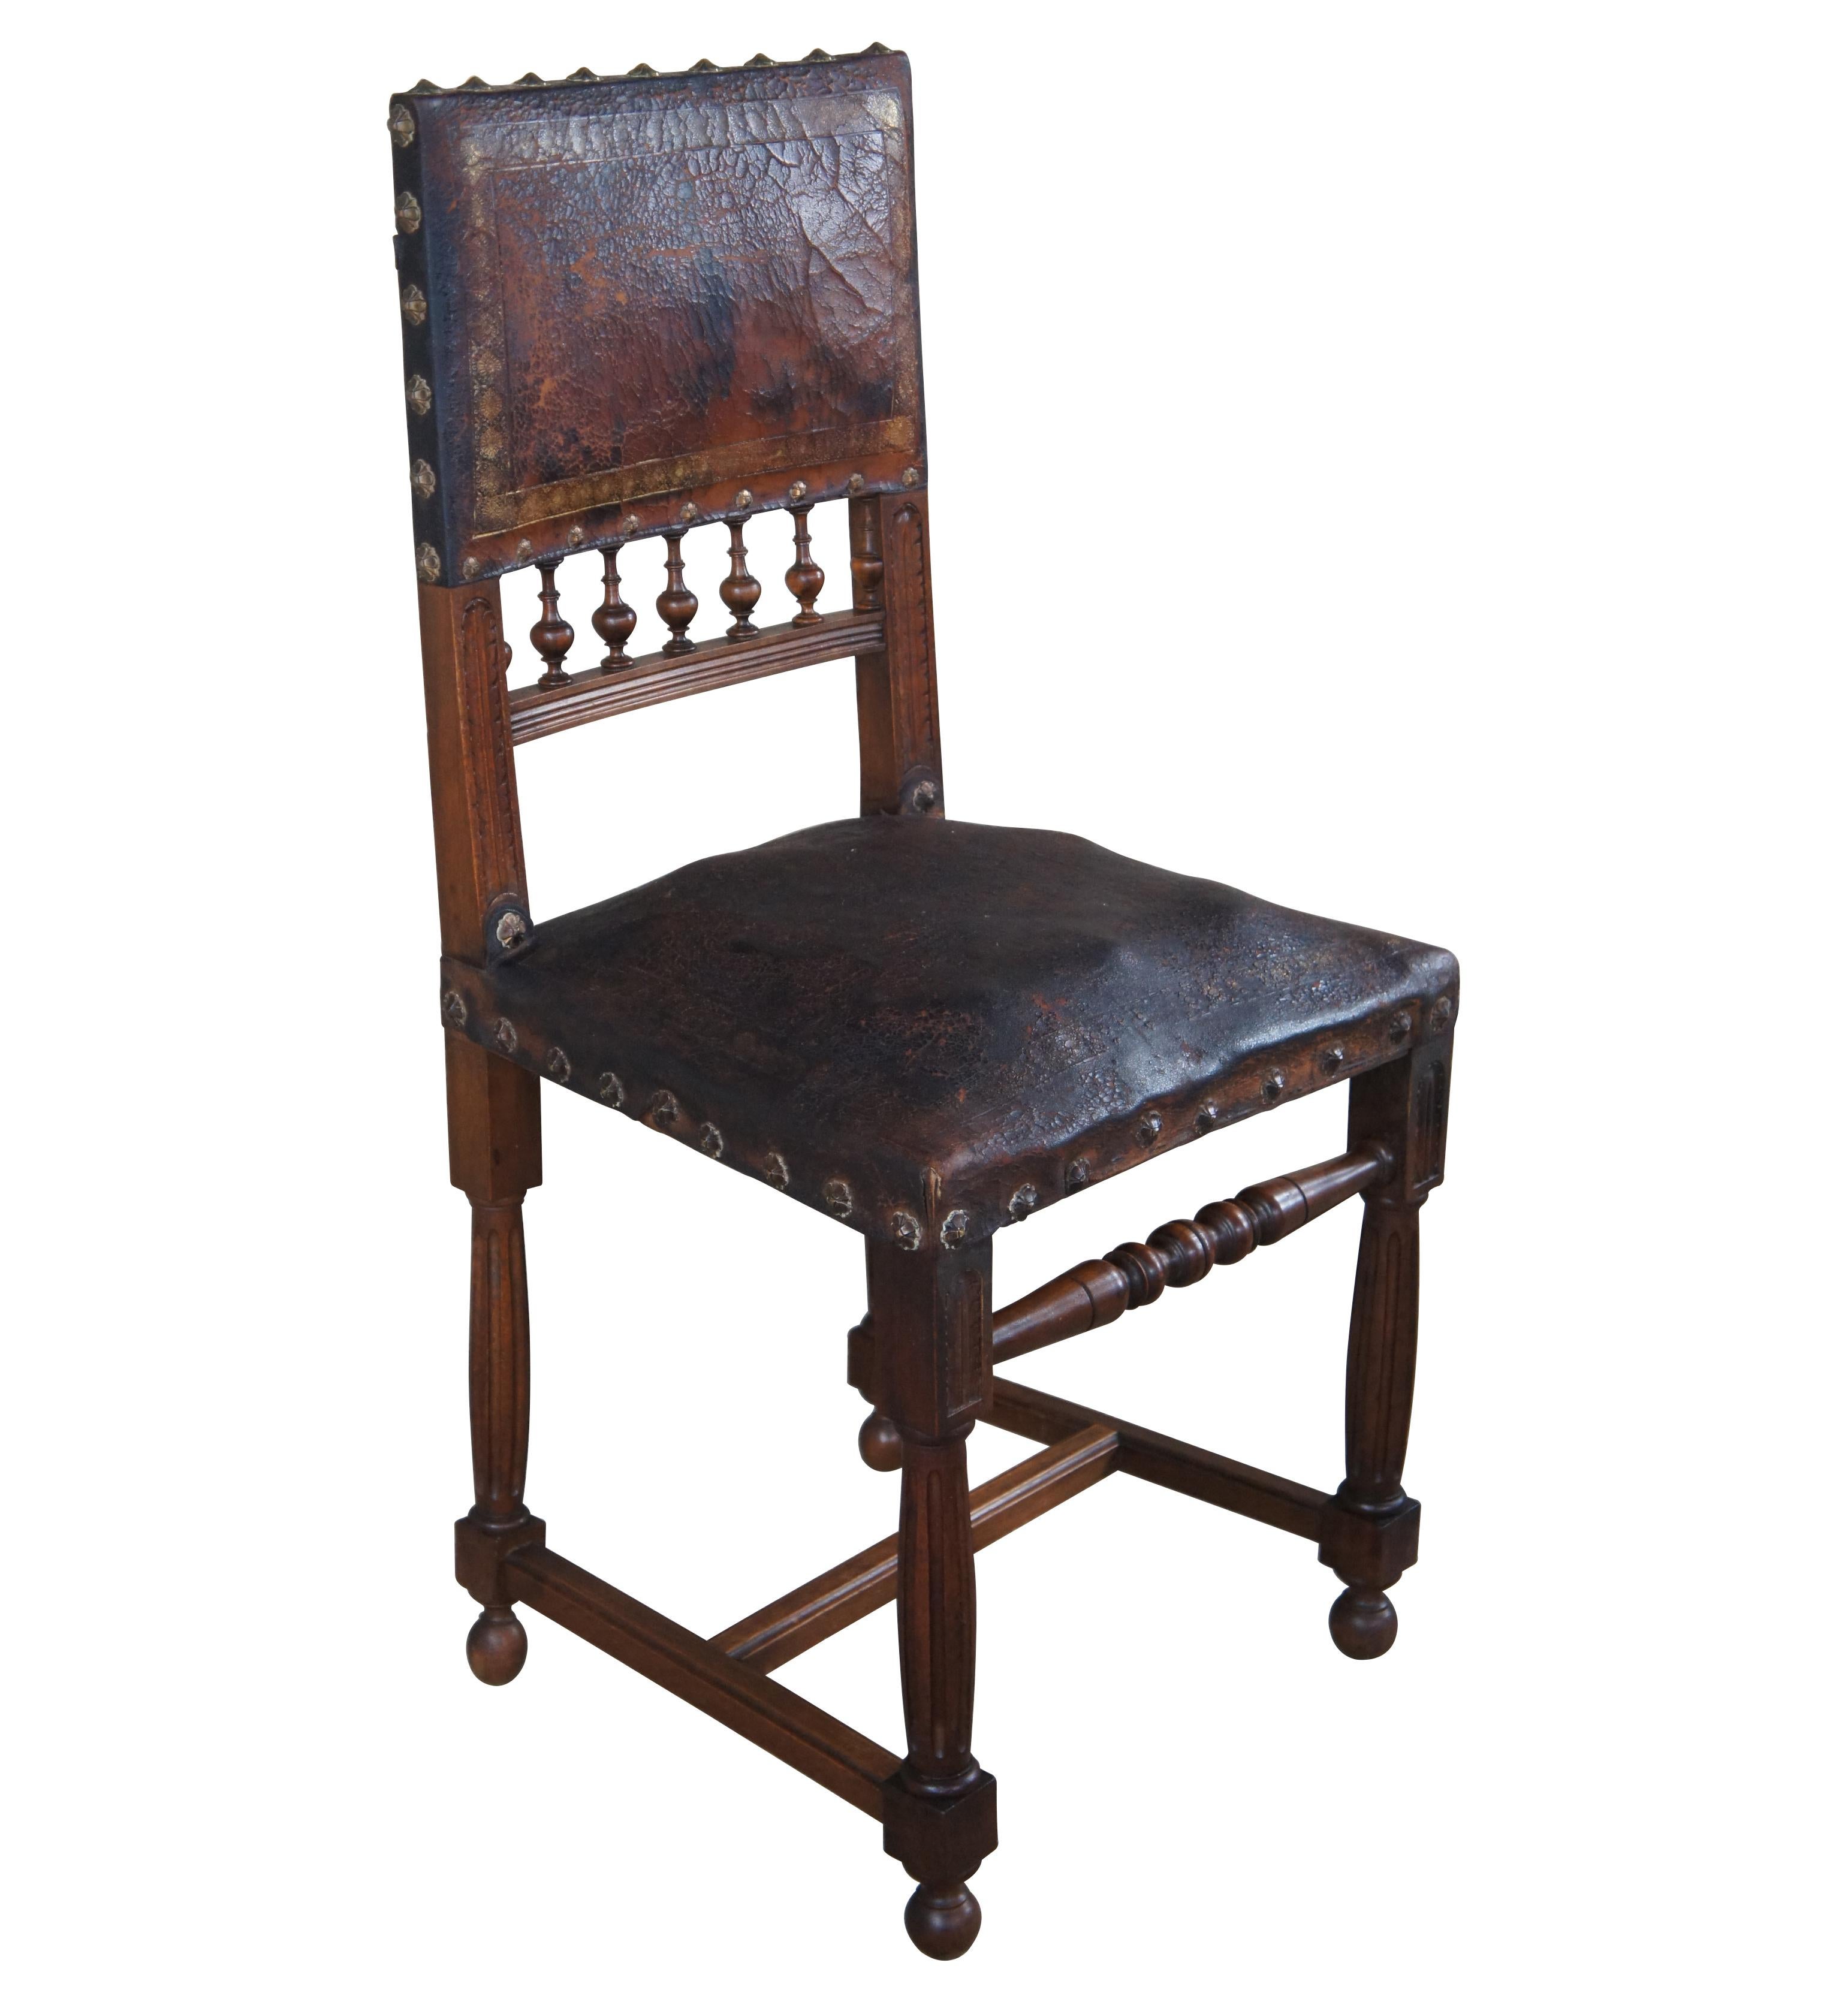 Antique 19th Century Henry II Renaissance Revival Mahogany & Leather Side Chair In Good Condition For Sale In Dayton, OH